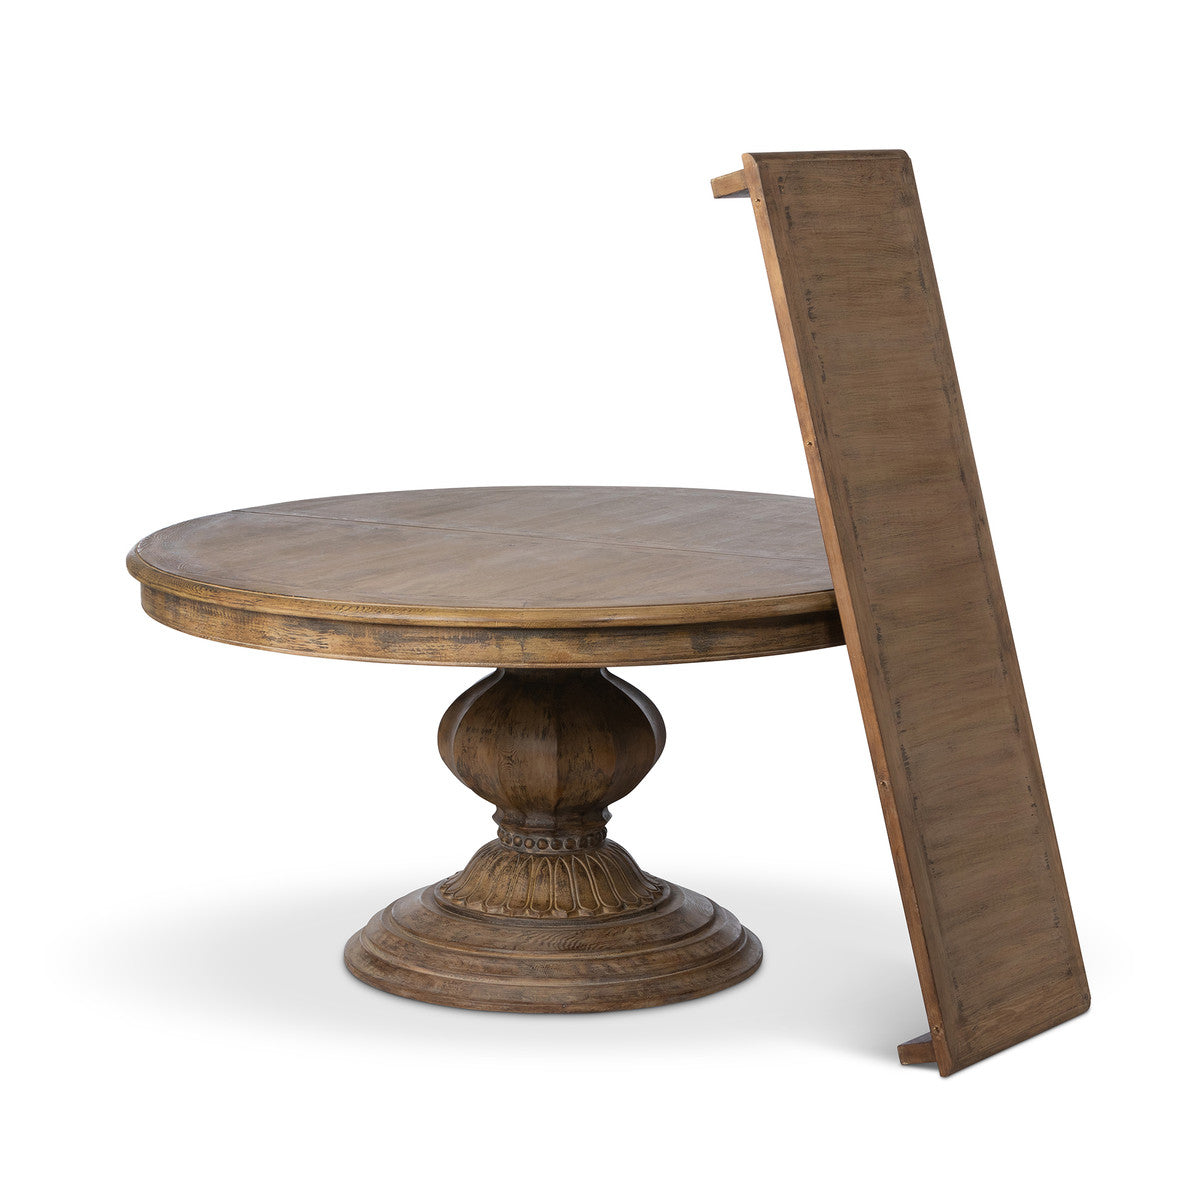 Ripley Extending Pedestal Dining Table The Alley Exchange, Restoration Hardware Extending Tables